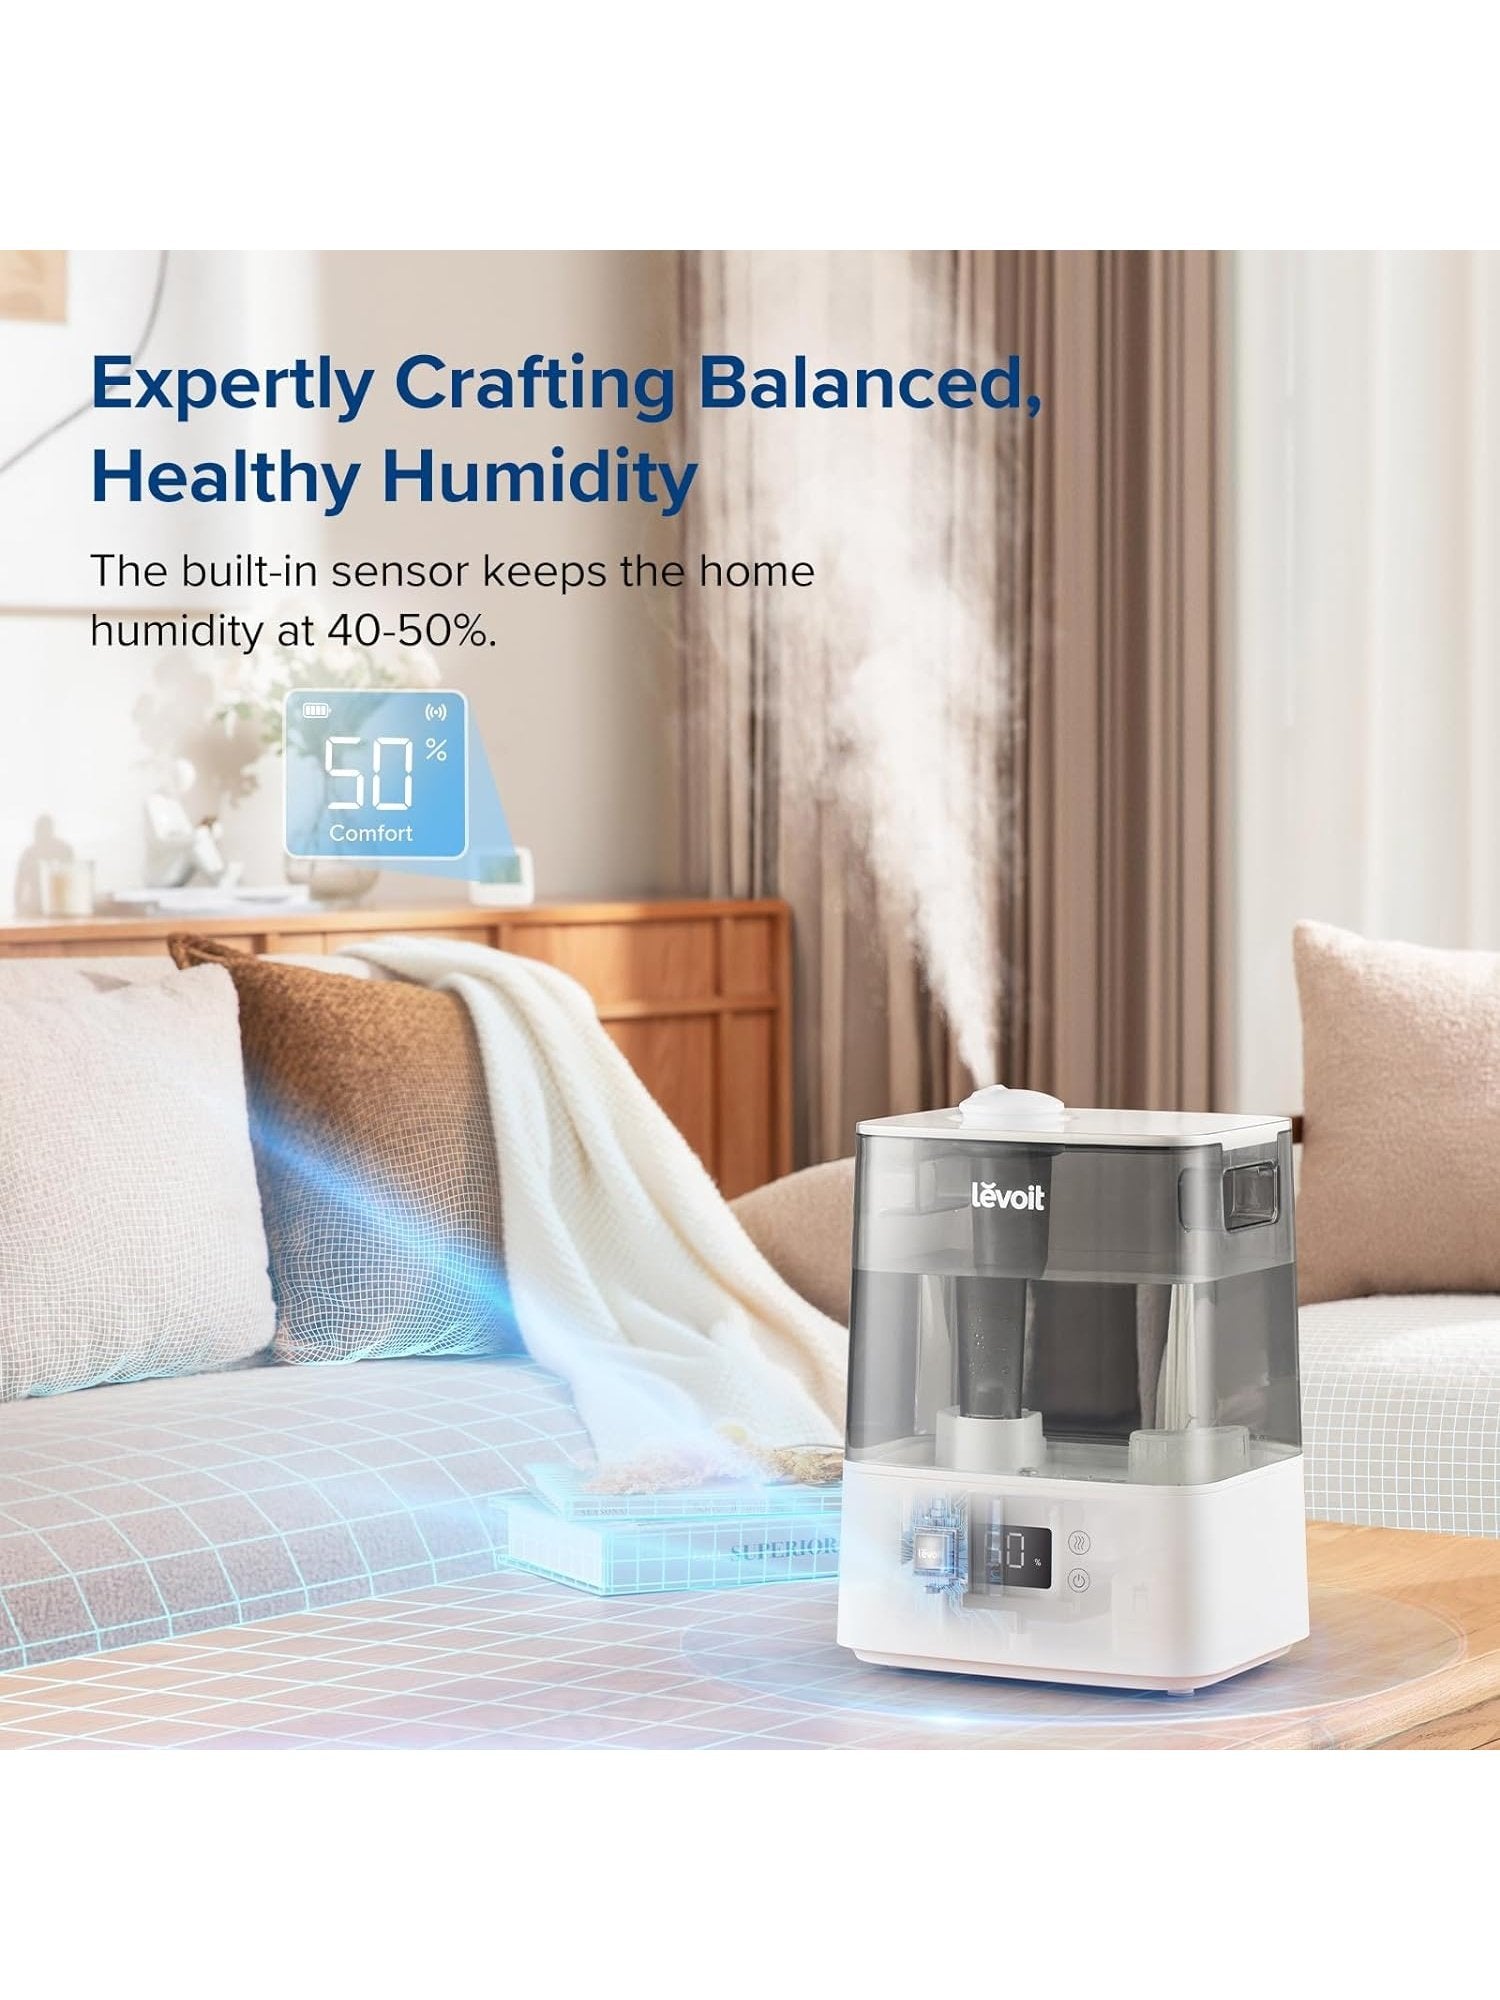 LEVOIT Humidifiers for Bedroom Large Room Home, 6L Cool Mist Top Fill Essential Oil Diffuser for Baby & Plants, Smart App & Voice Control, Rapid Humidification & Auto Mode - Quiet Sleep Mode, Gray